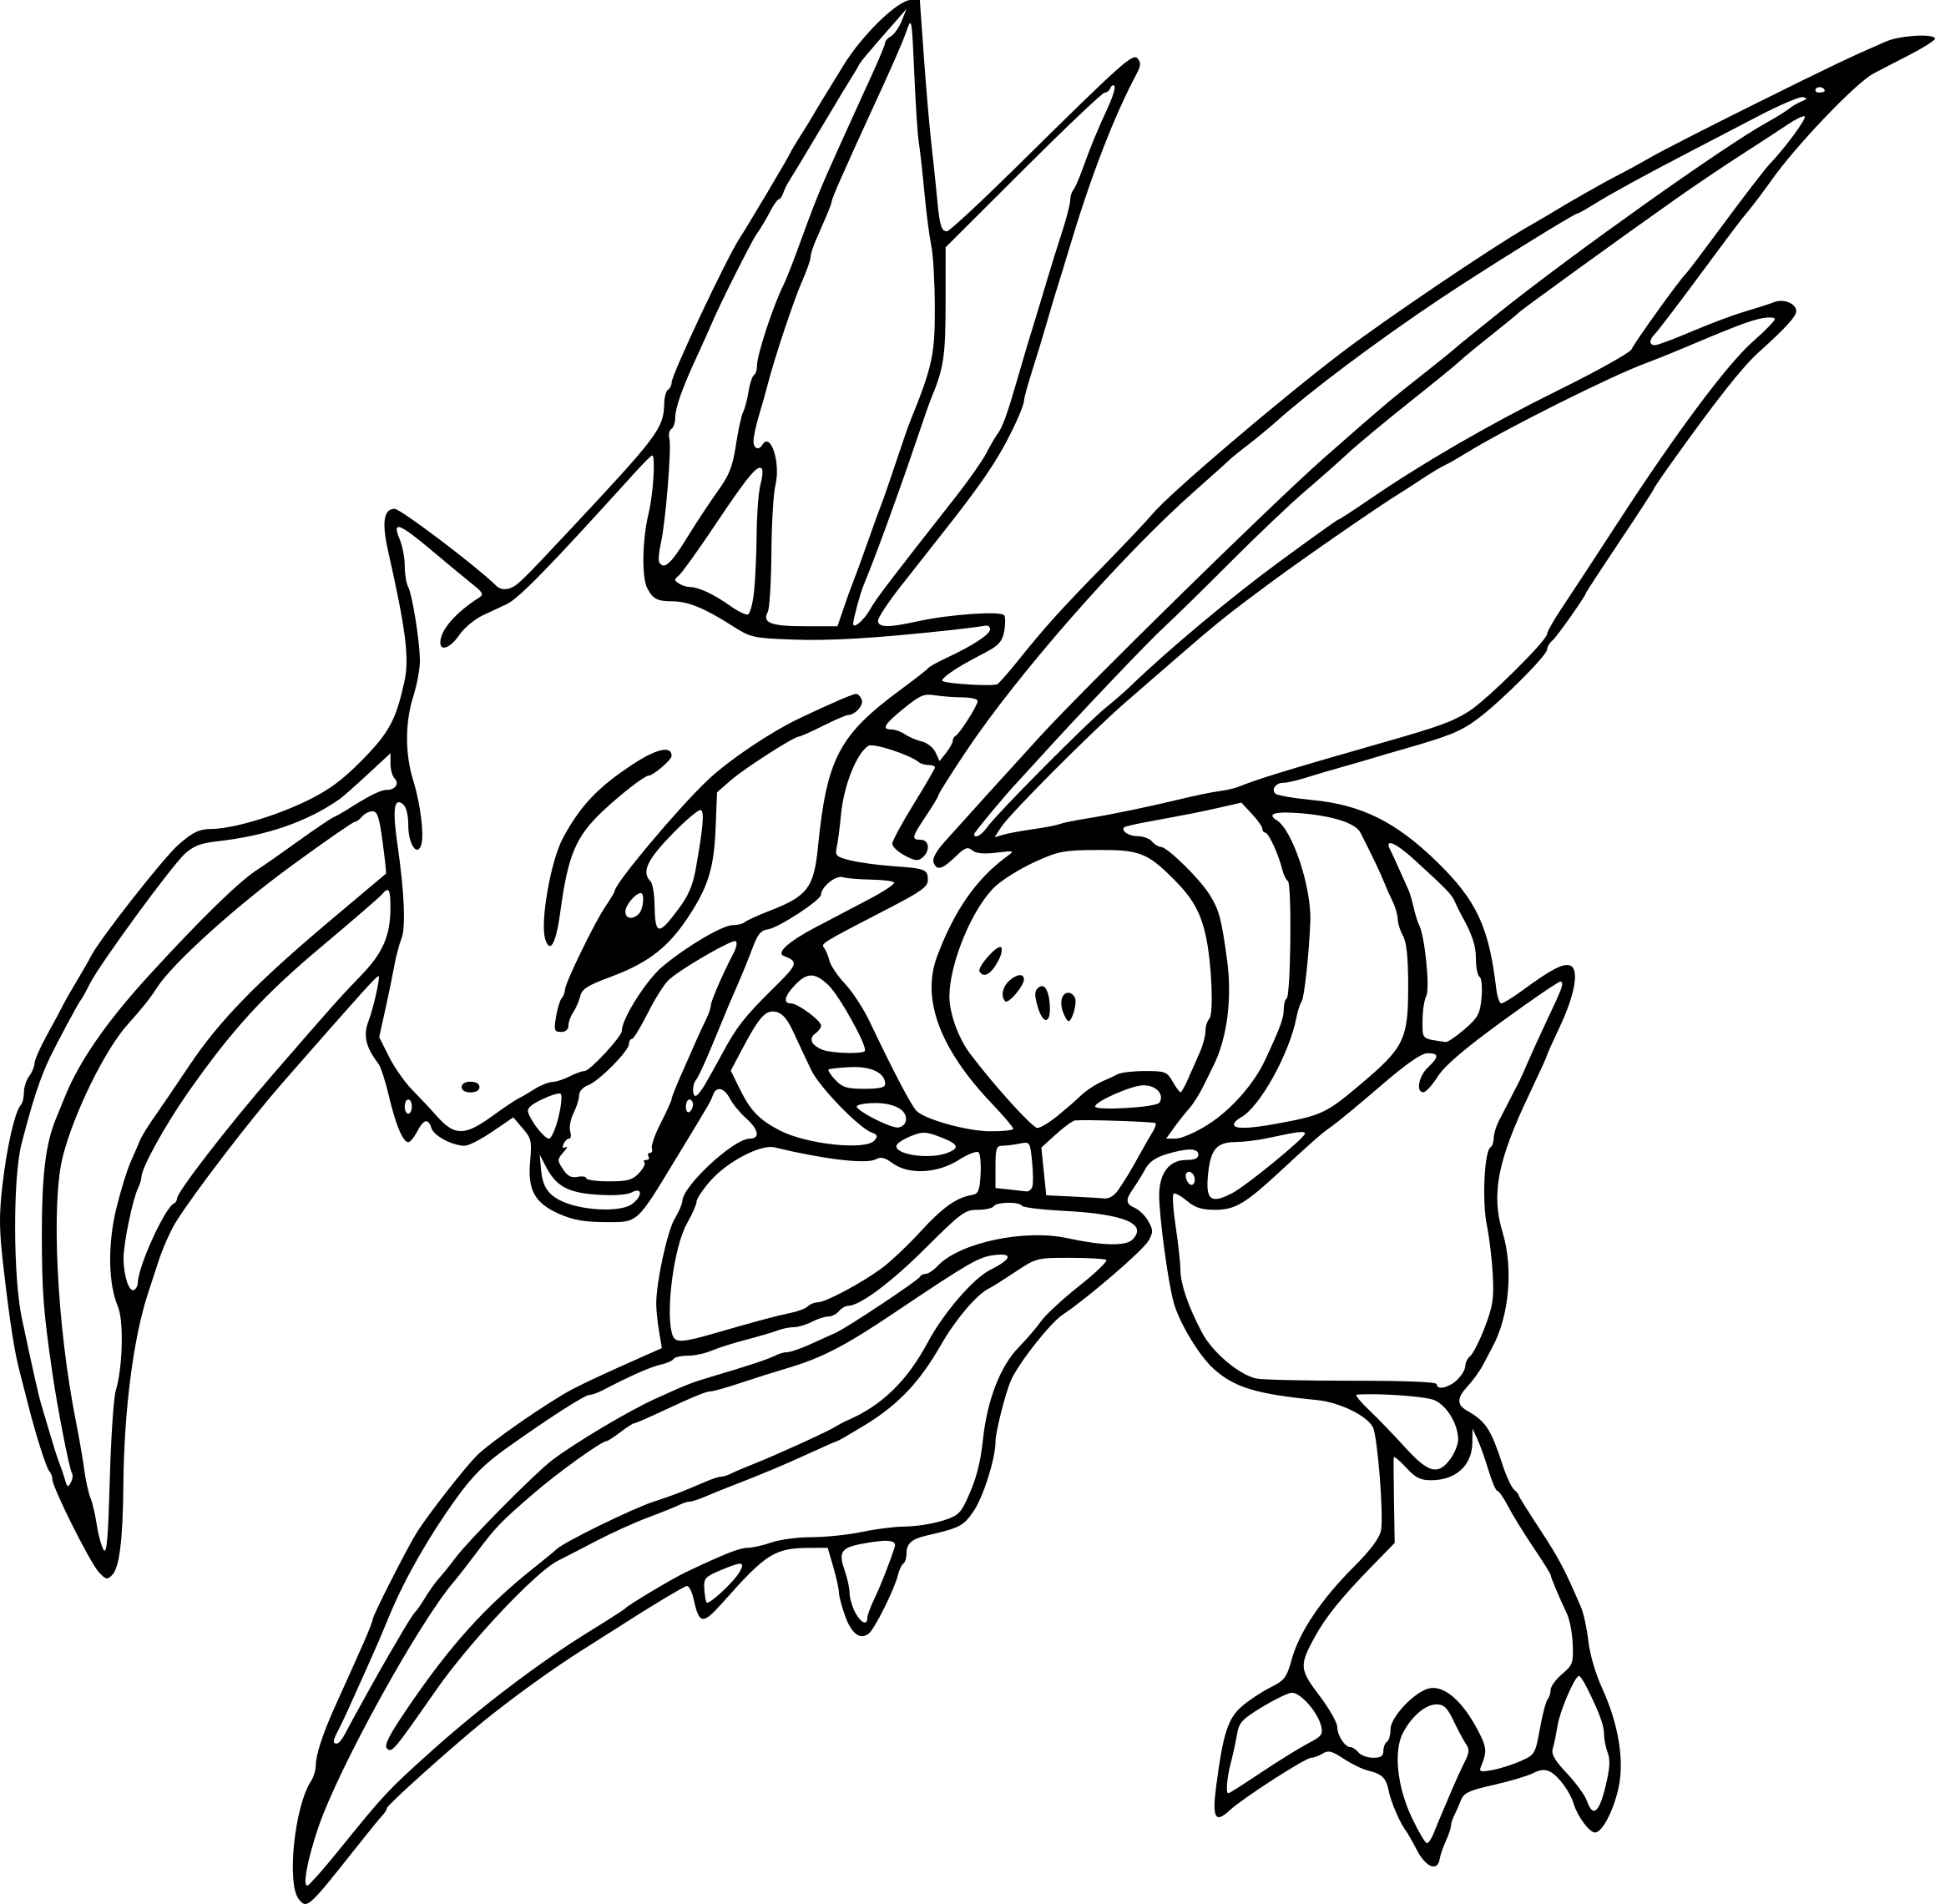 Scyther Pokemon coloring page